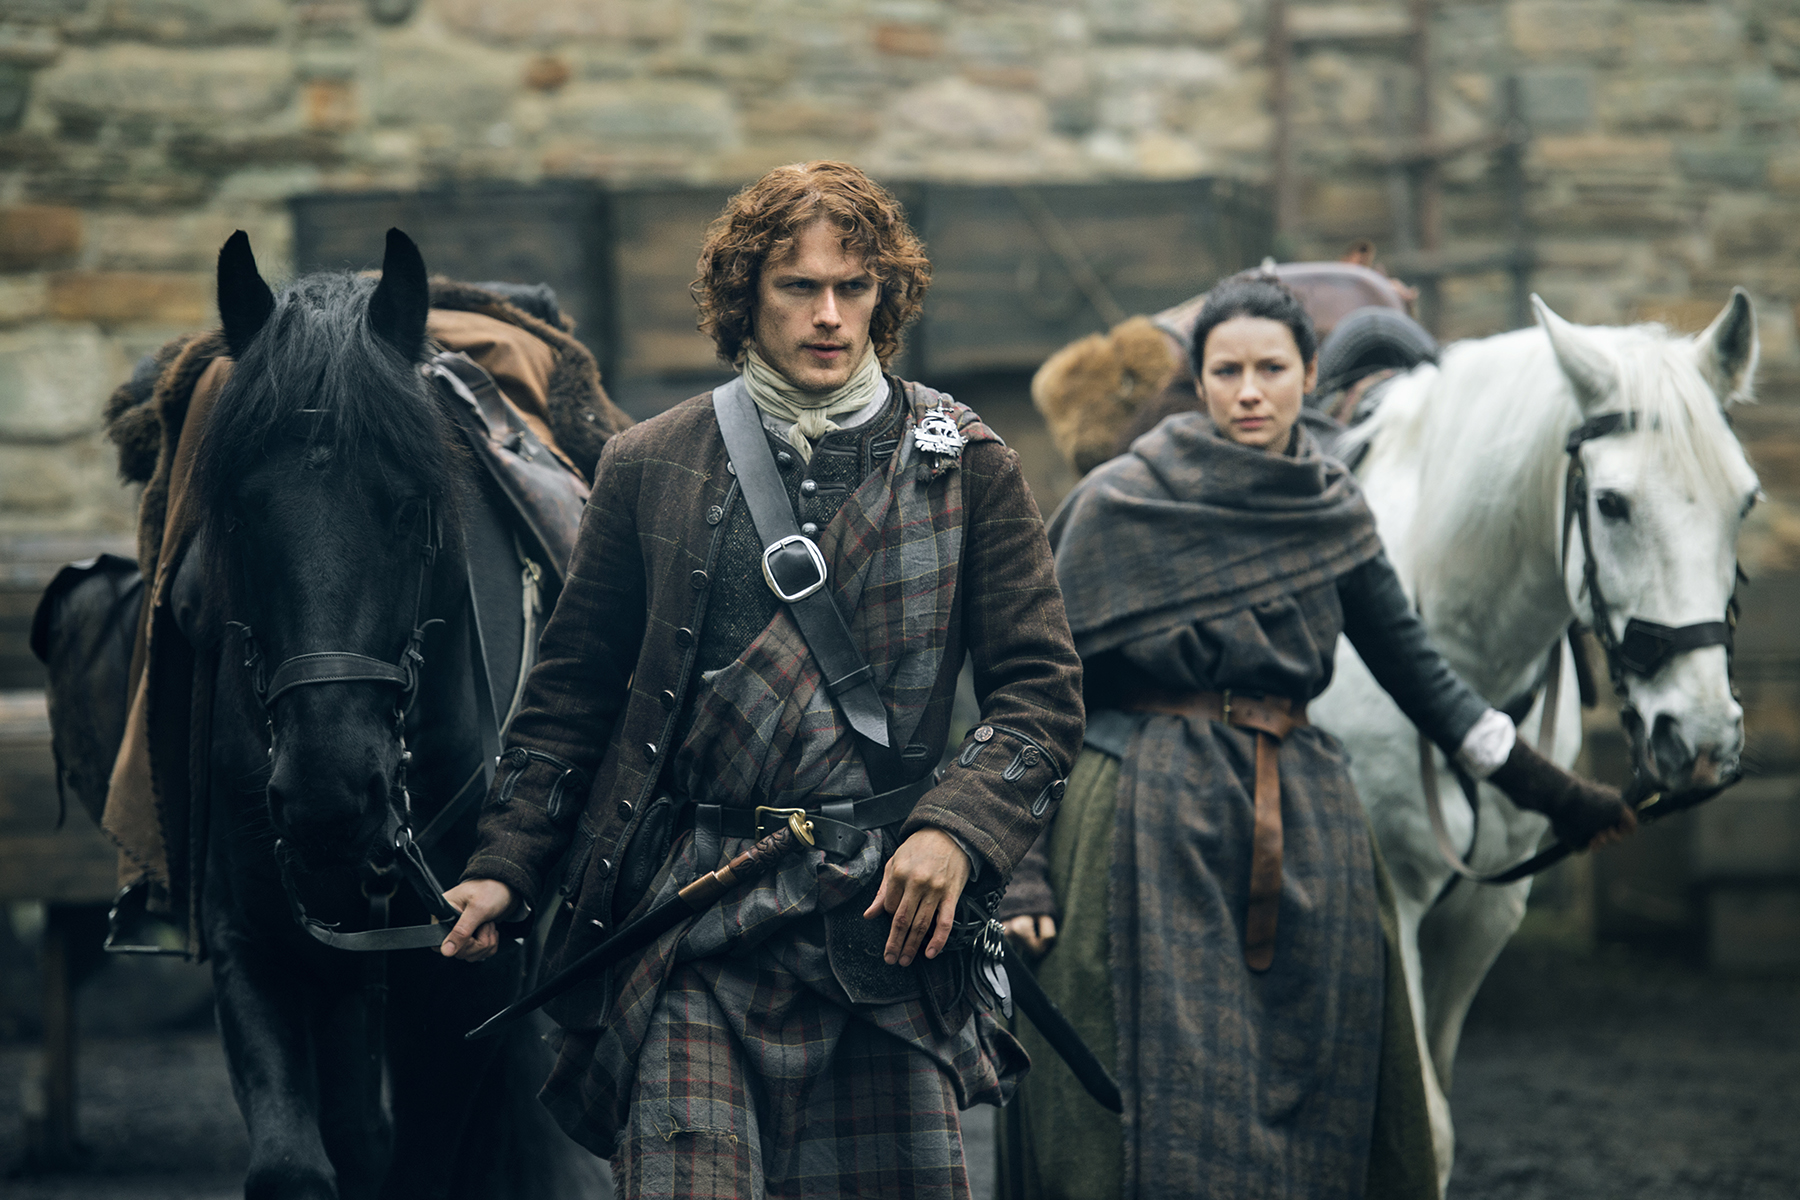 Jamie and Claire heading out of Lord Lovat's with their horses. Y'all with your witch-y business gonna get yourselves killed.